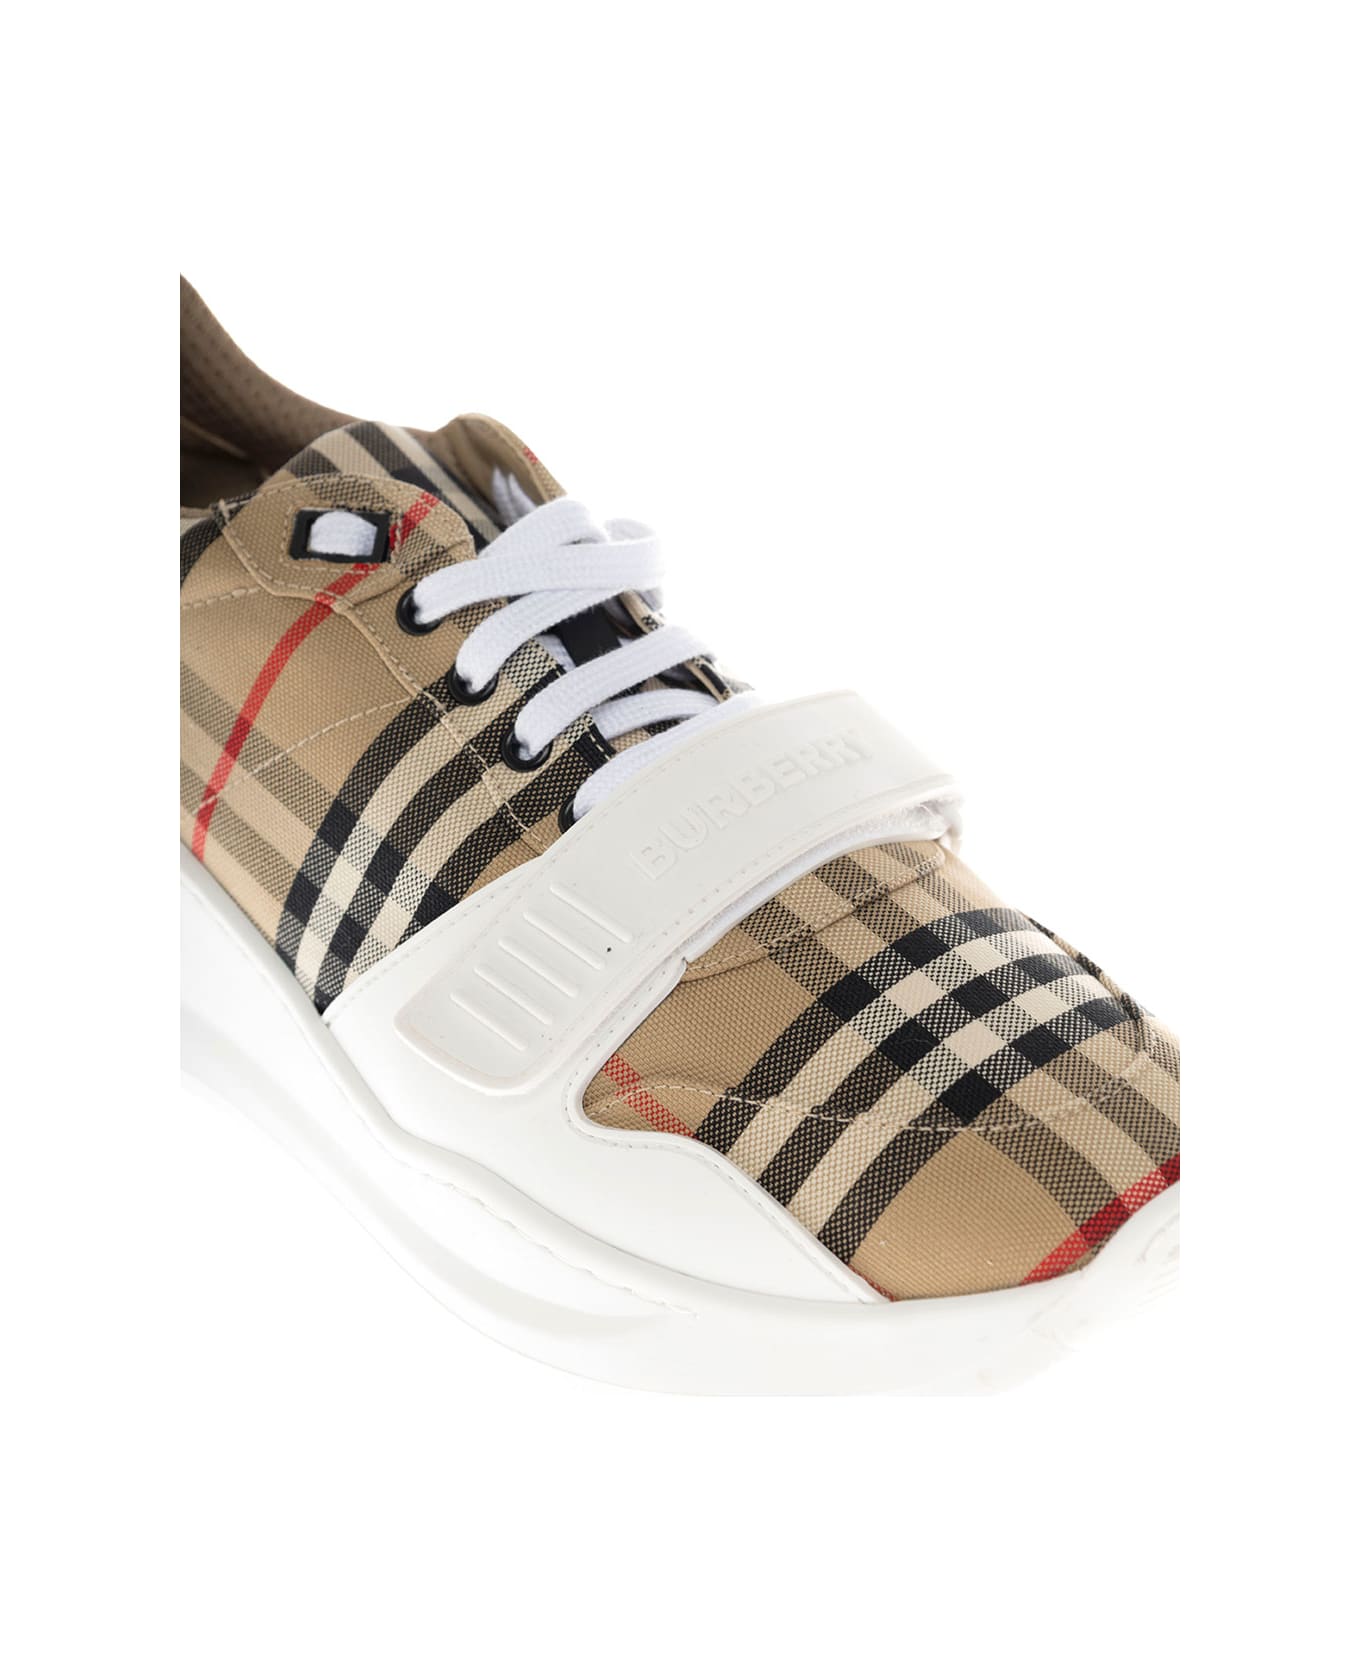 Burberry Vintage Check Fabric Sneakers Man Burberry - Beige